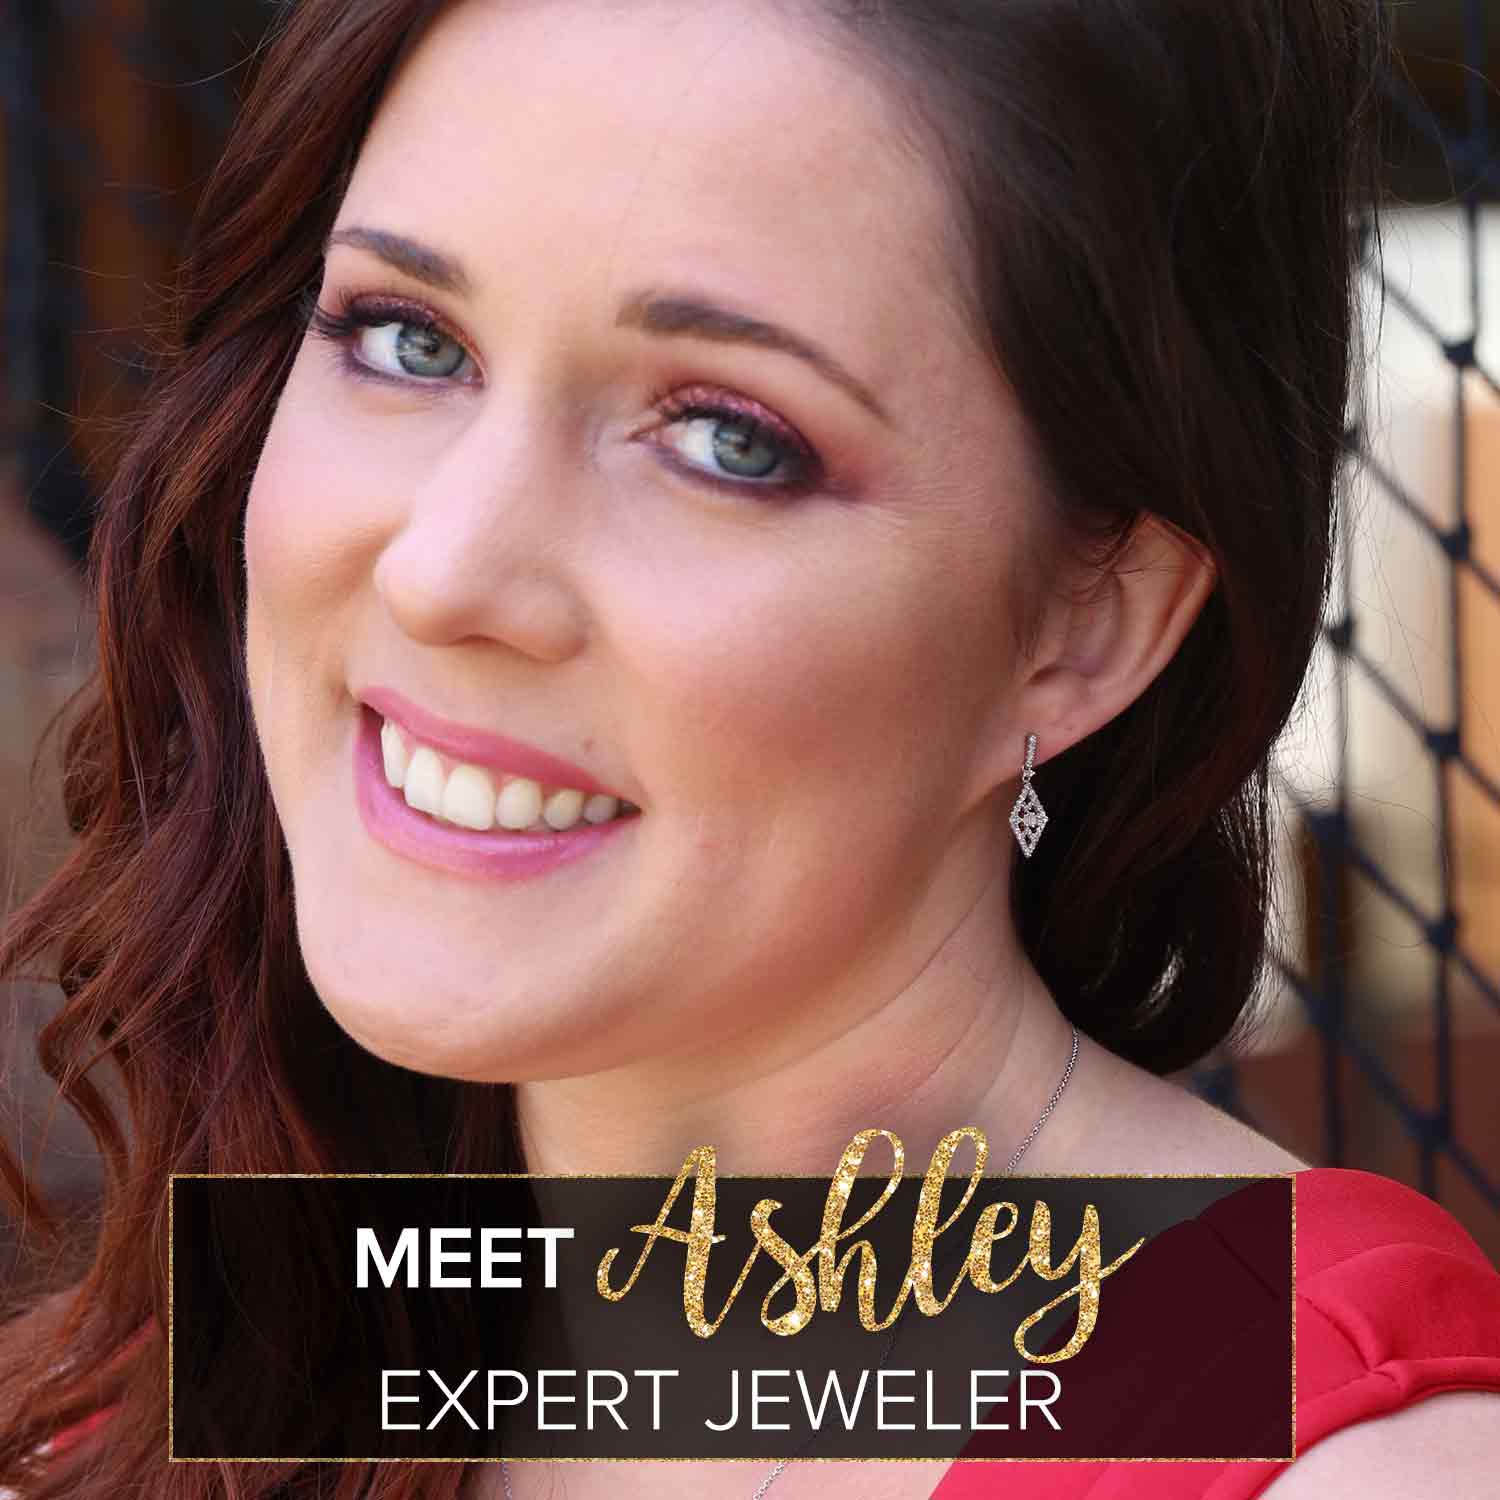 A picture of our expert jeweler, Ashley